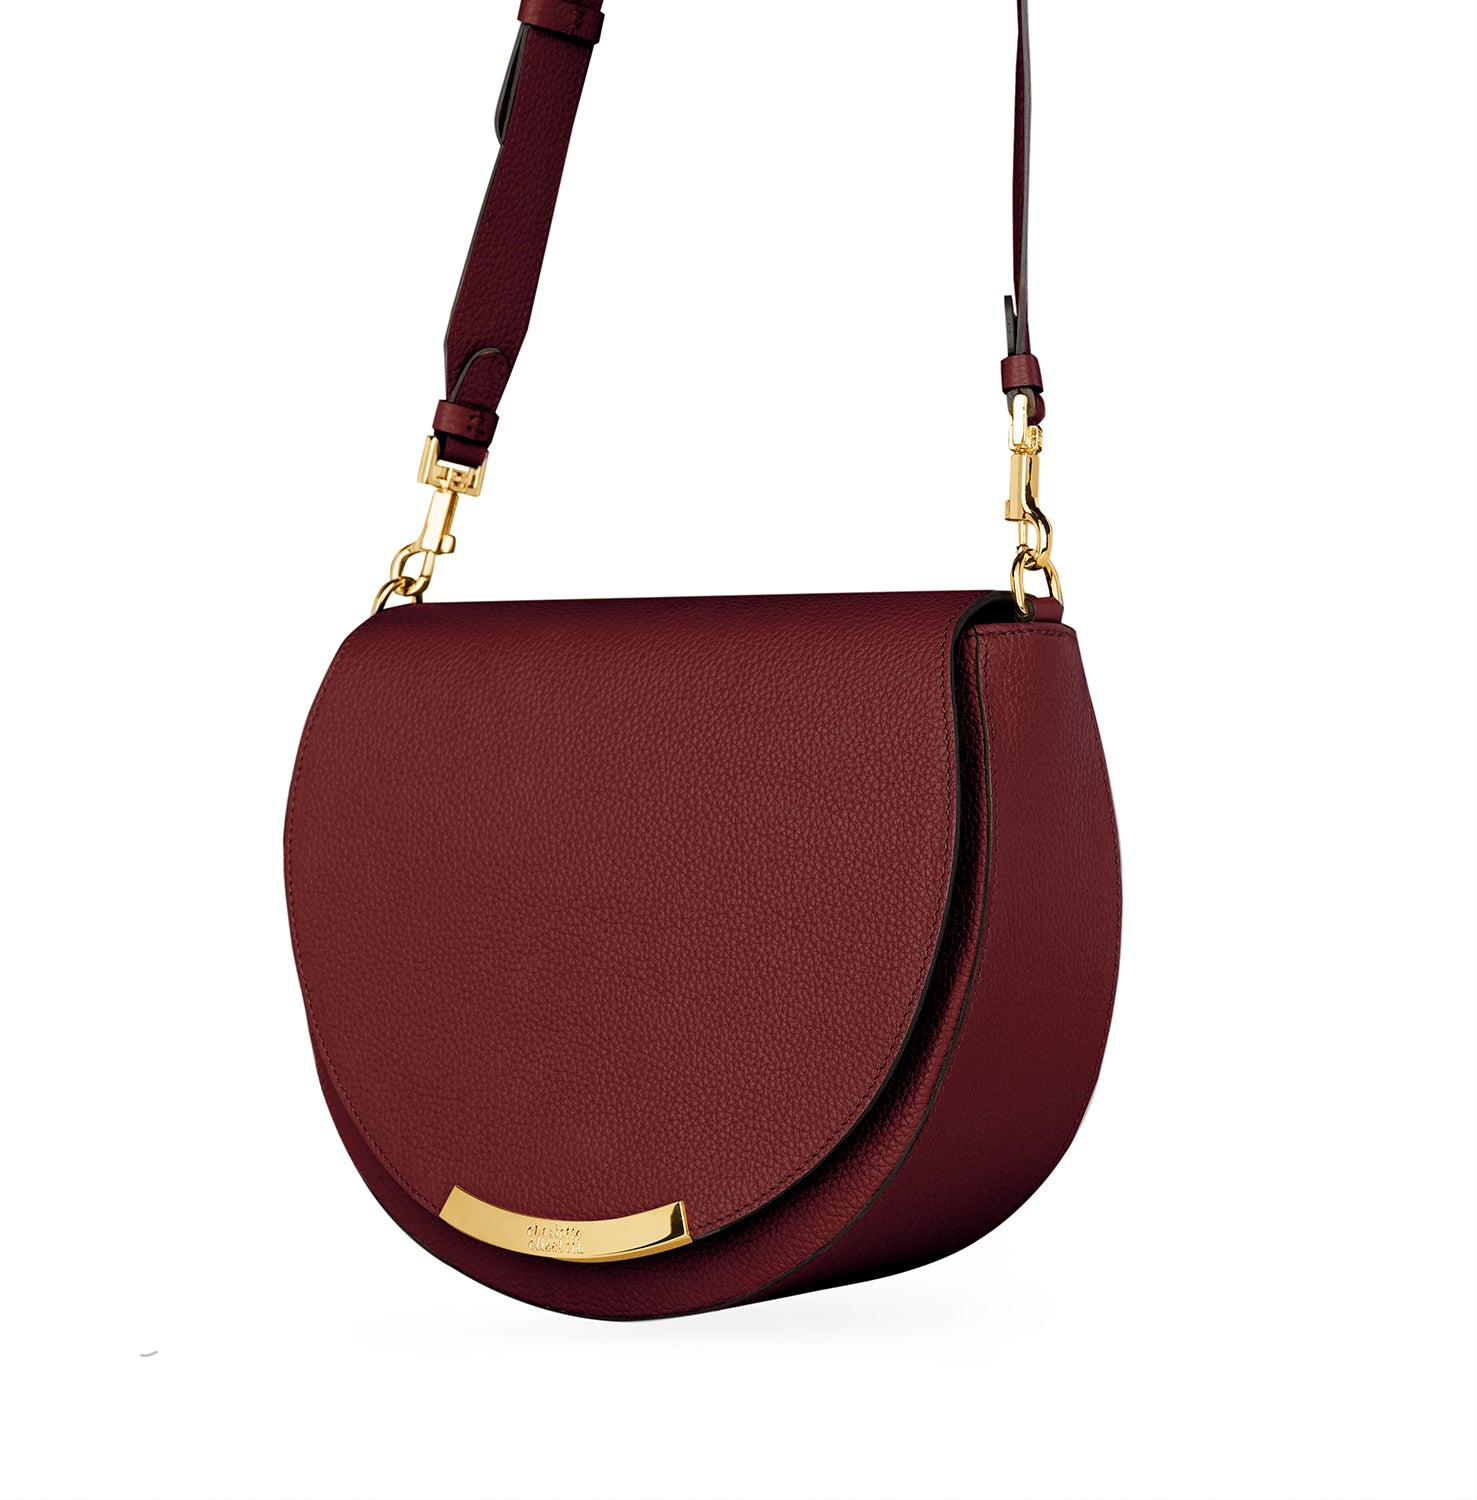 crossbody shoulder strap bag in red with gold hardware classic